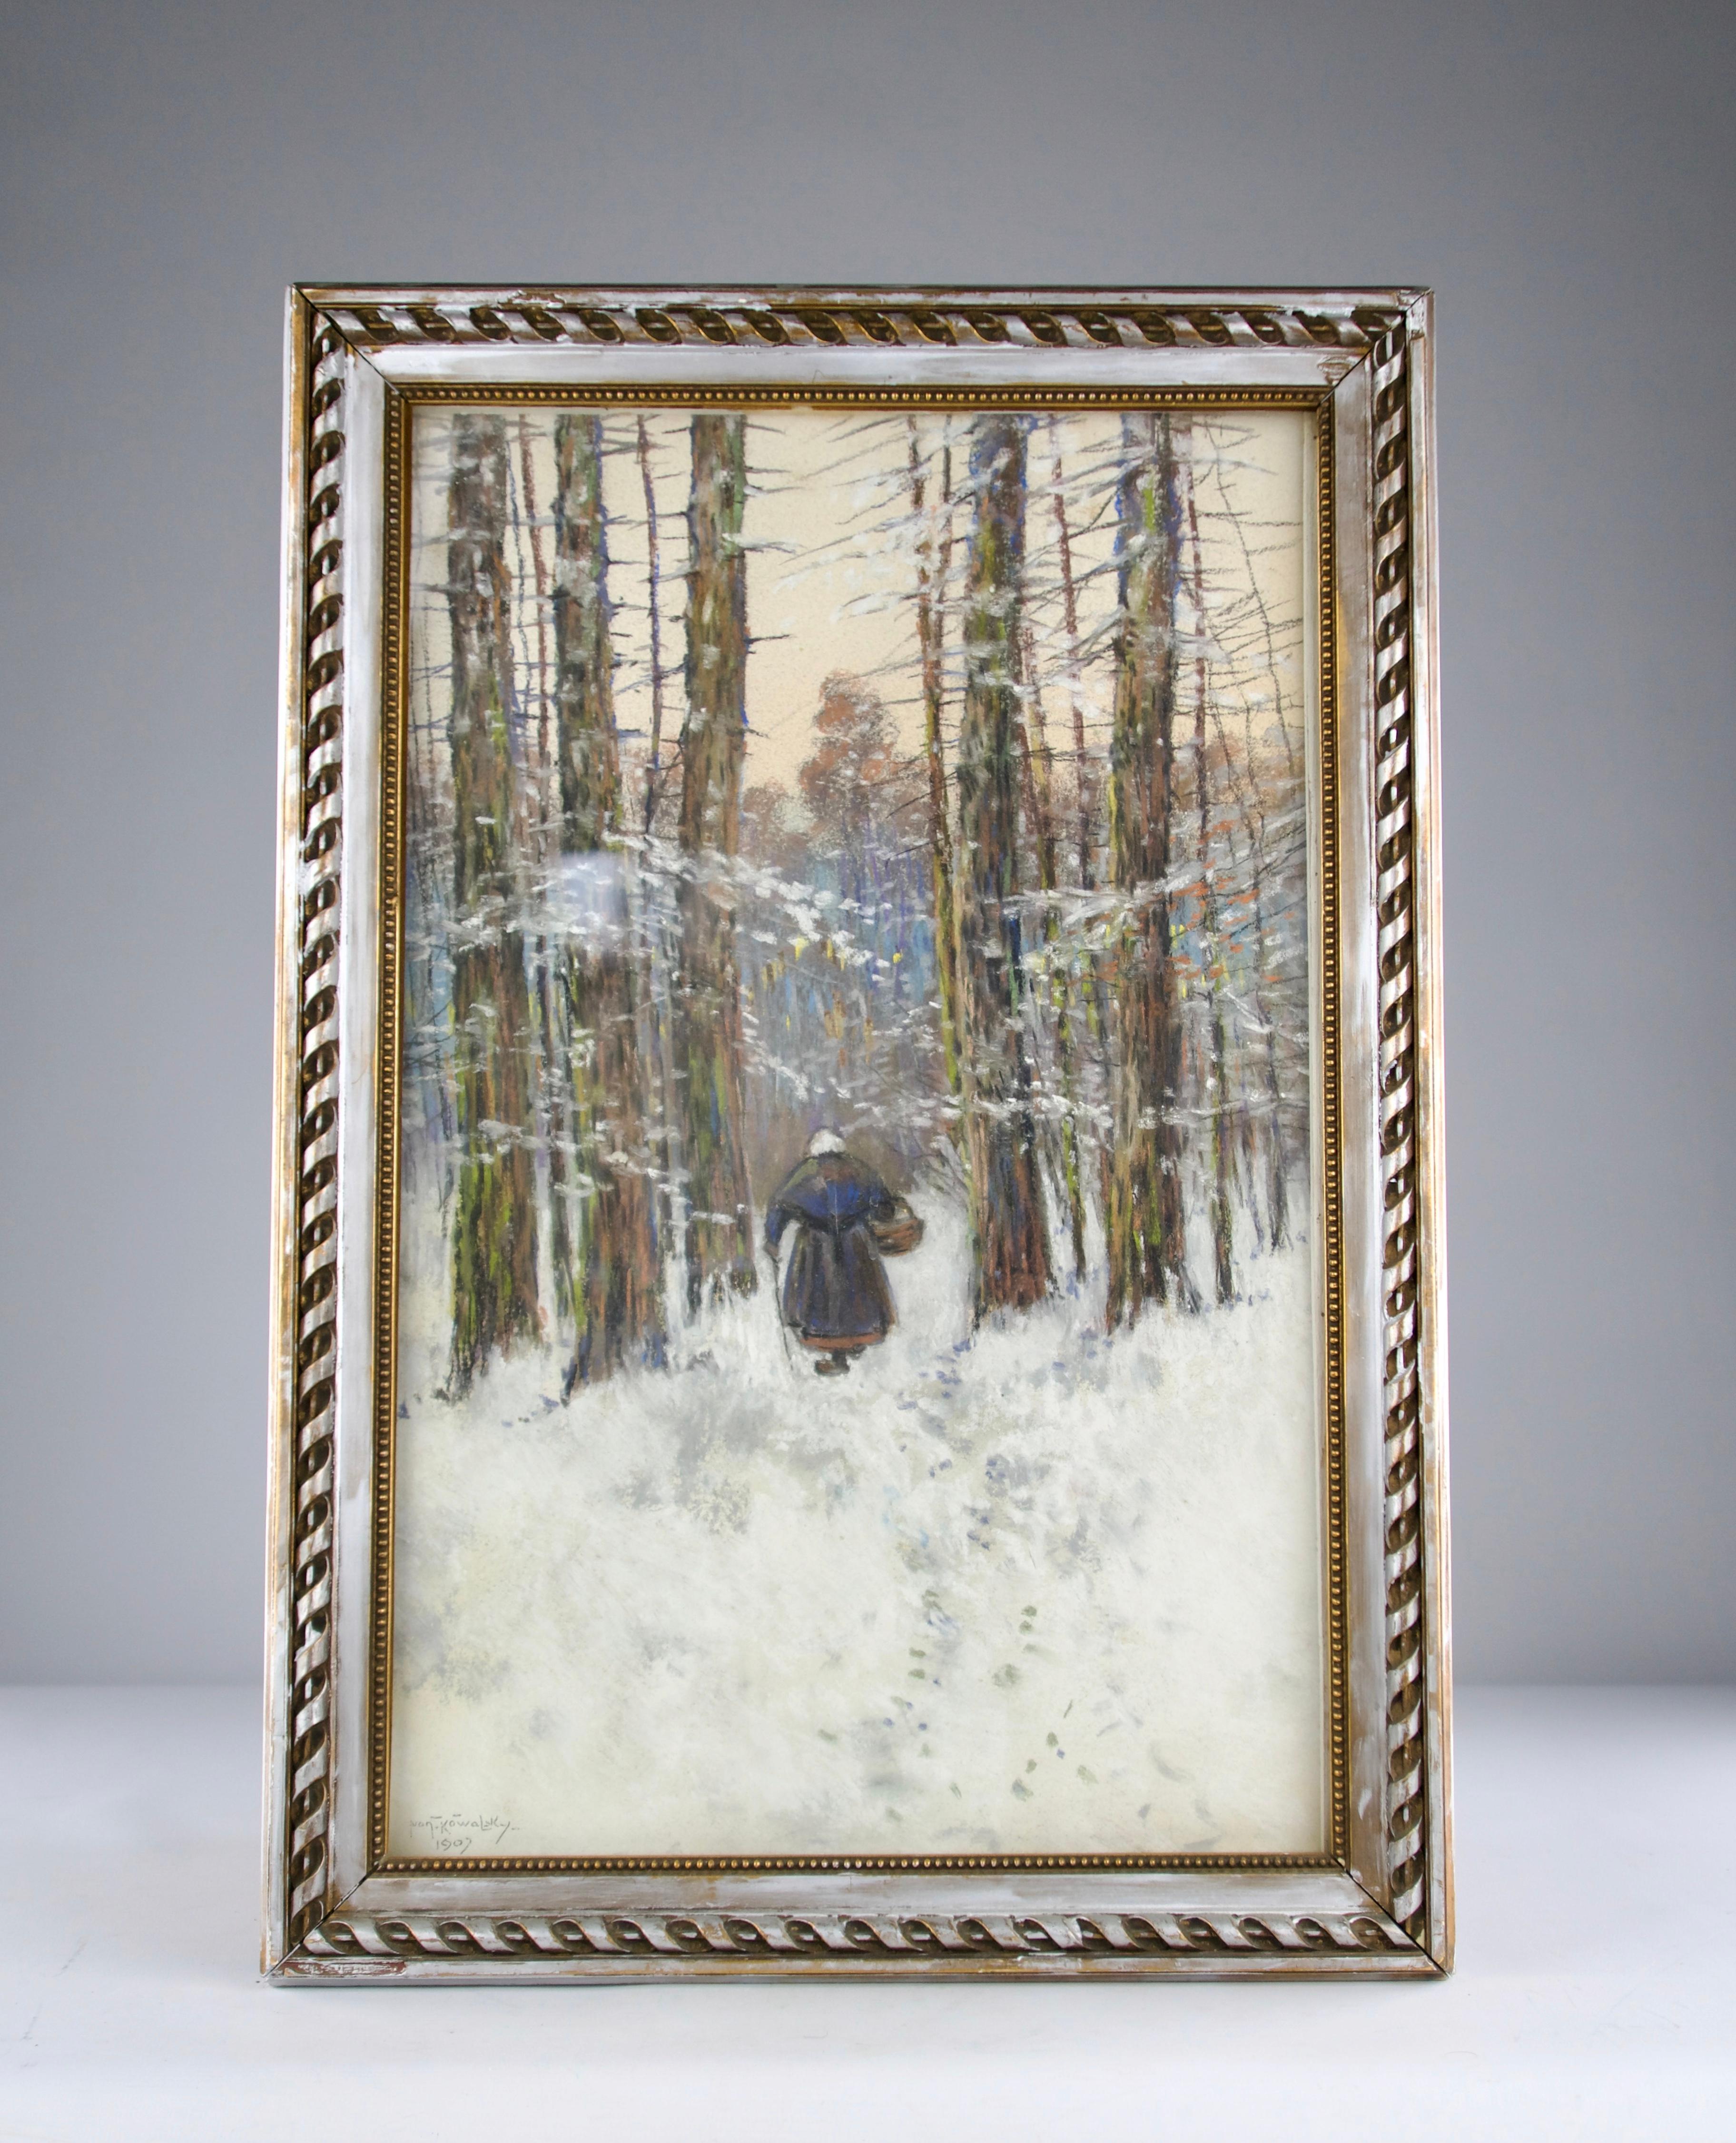 Beautiful pastel on paper by Ivan Ivanovitch Kowalski (1839-1937), signed and dated 1907. Depicting a woman walking in a snowy forest. Post-impressionist work of the Russian school.

Good condition and framed.

Dimensions in cm :
- View 47 x 30
-